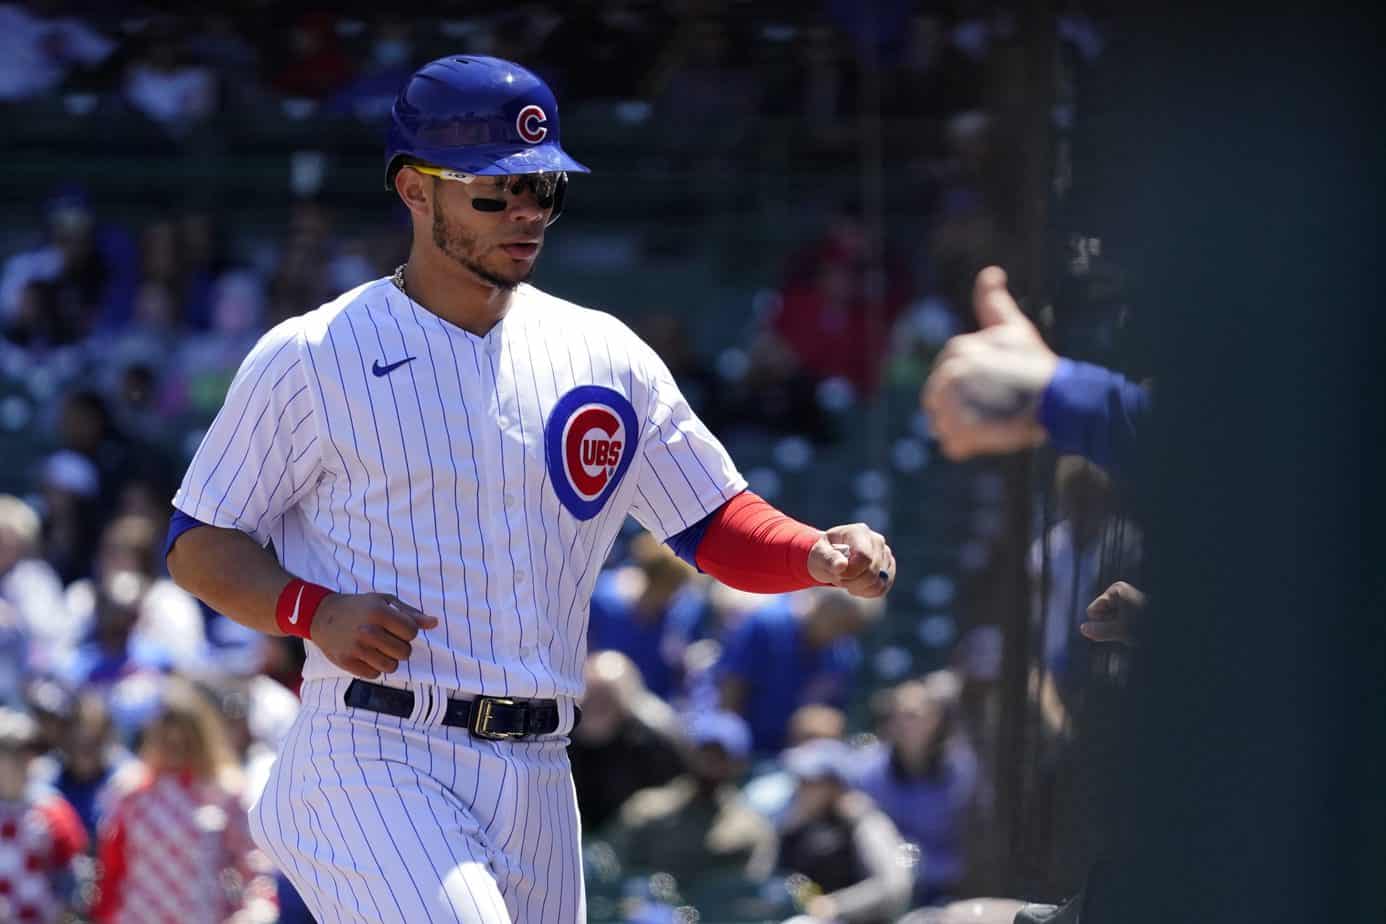 Chicago Cubs catcher Willson Contreras removed all affiliation with the team from his social media pages while he remains far apart on any extension talks